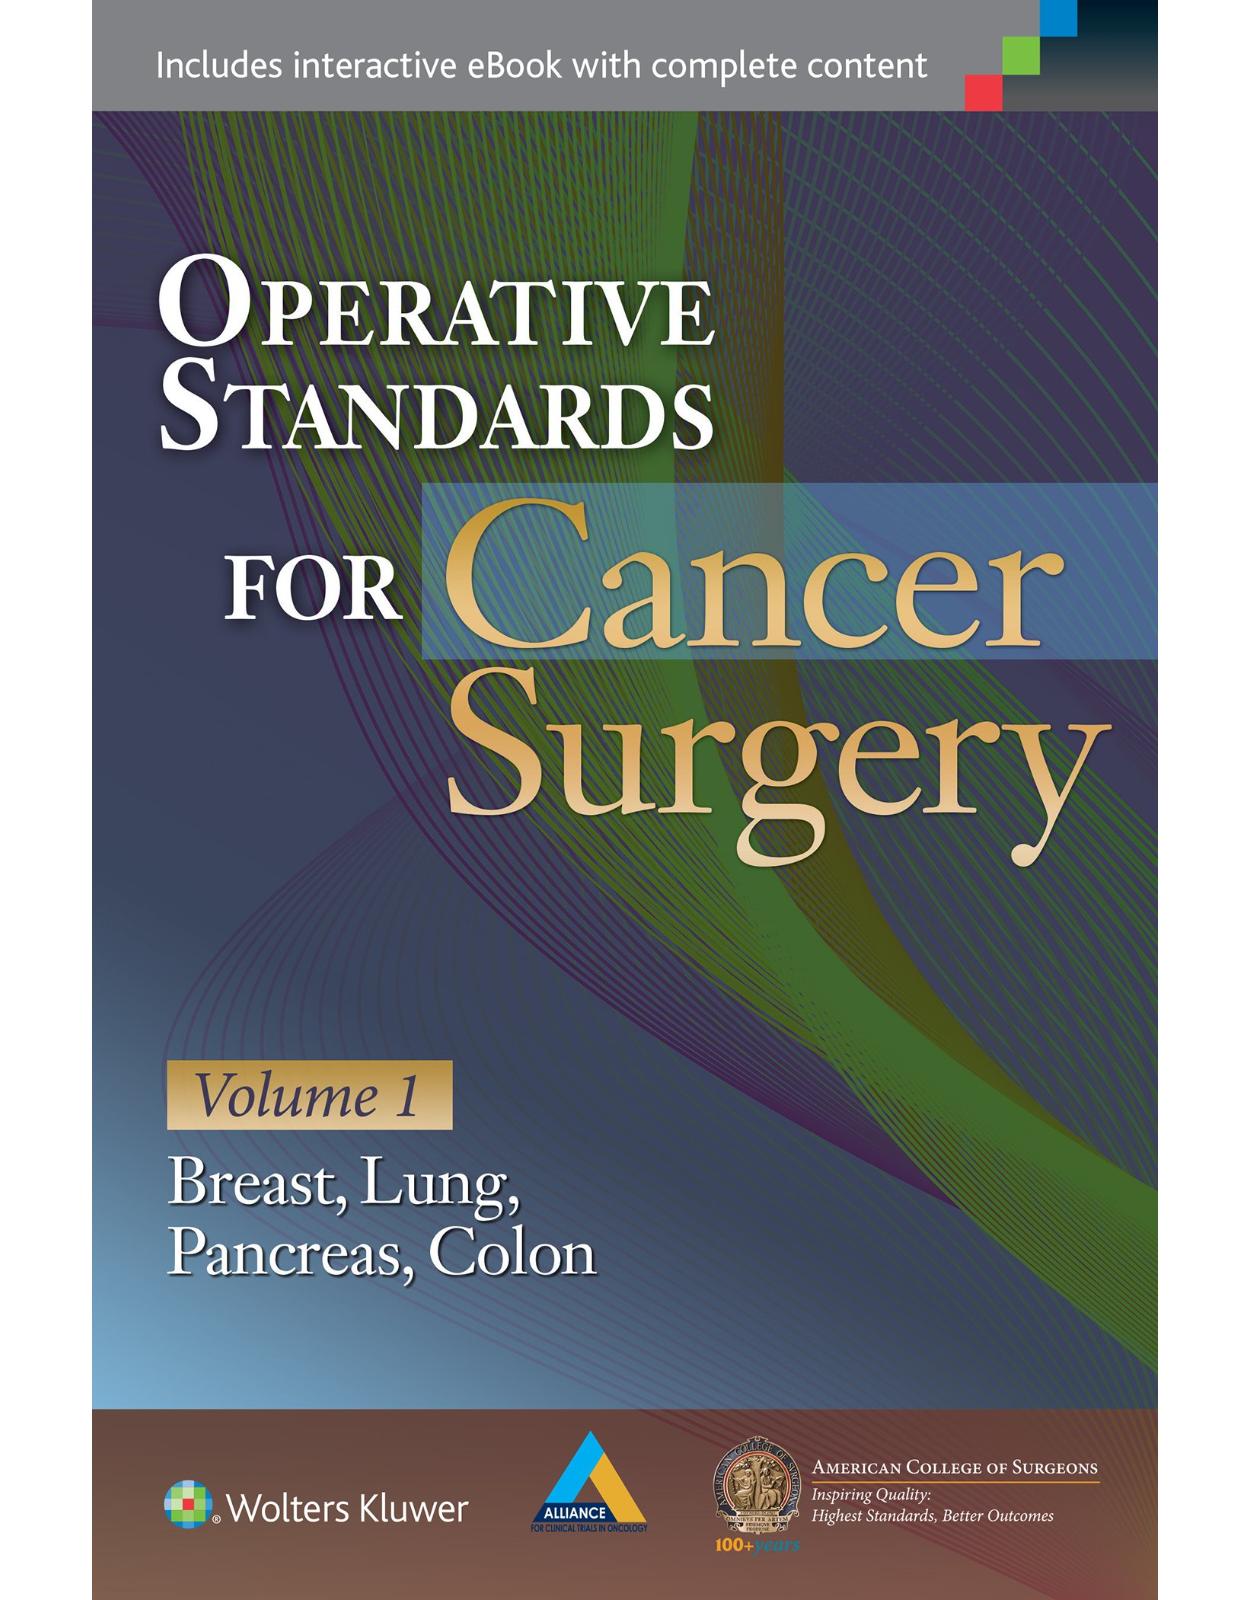 Operative Standards for Cancer Surgery Volume I: Breast, Lung, Pancreas, Colon